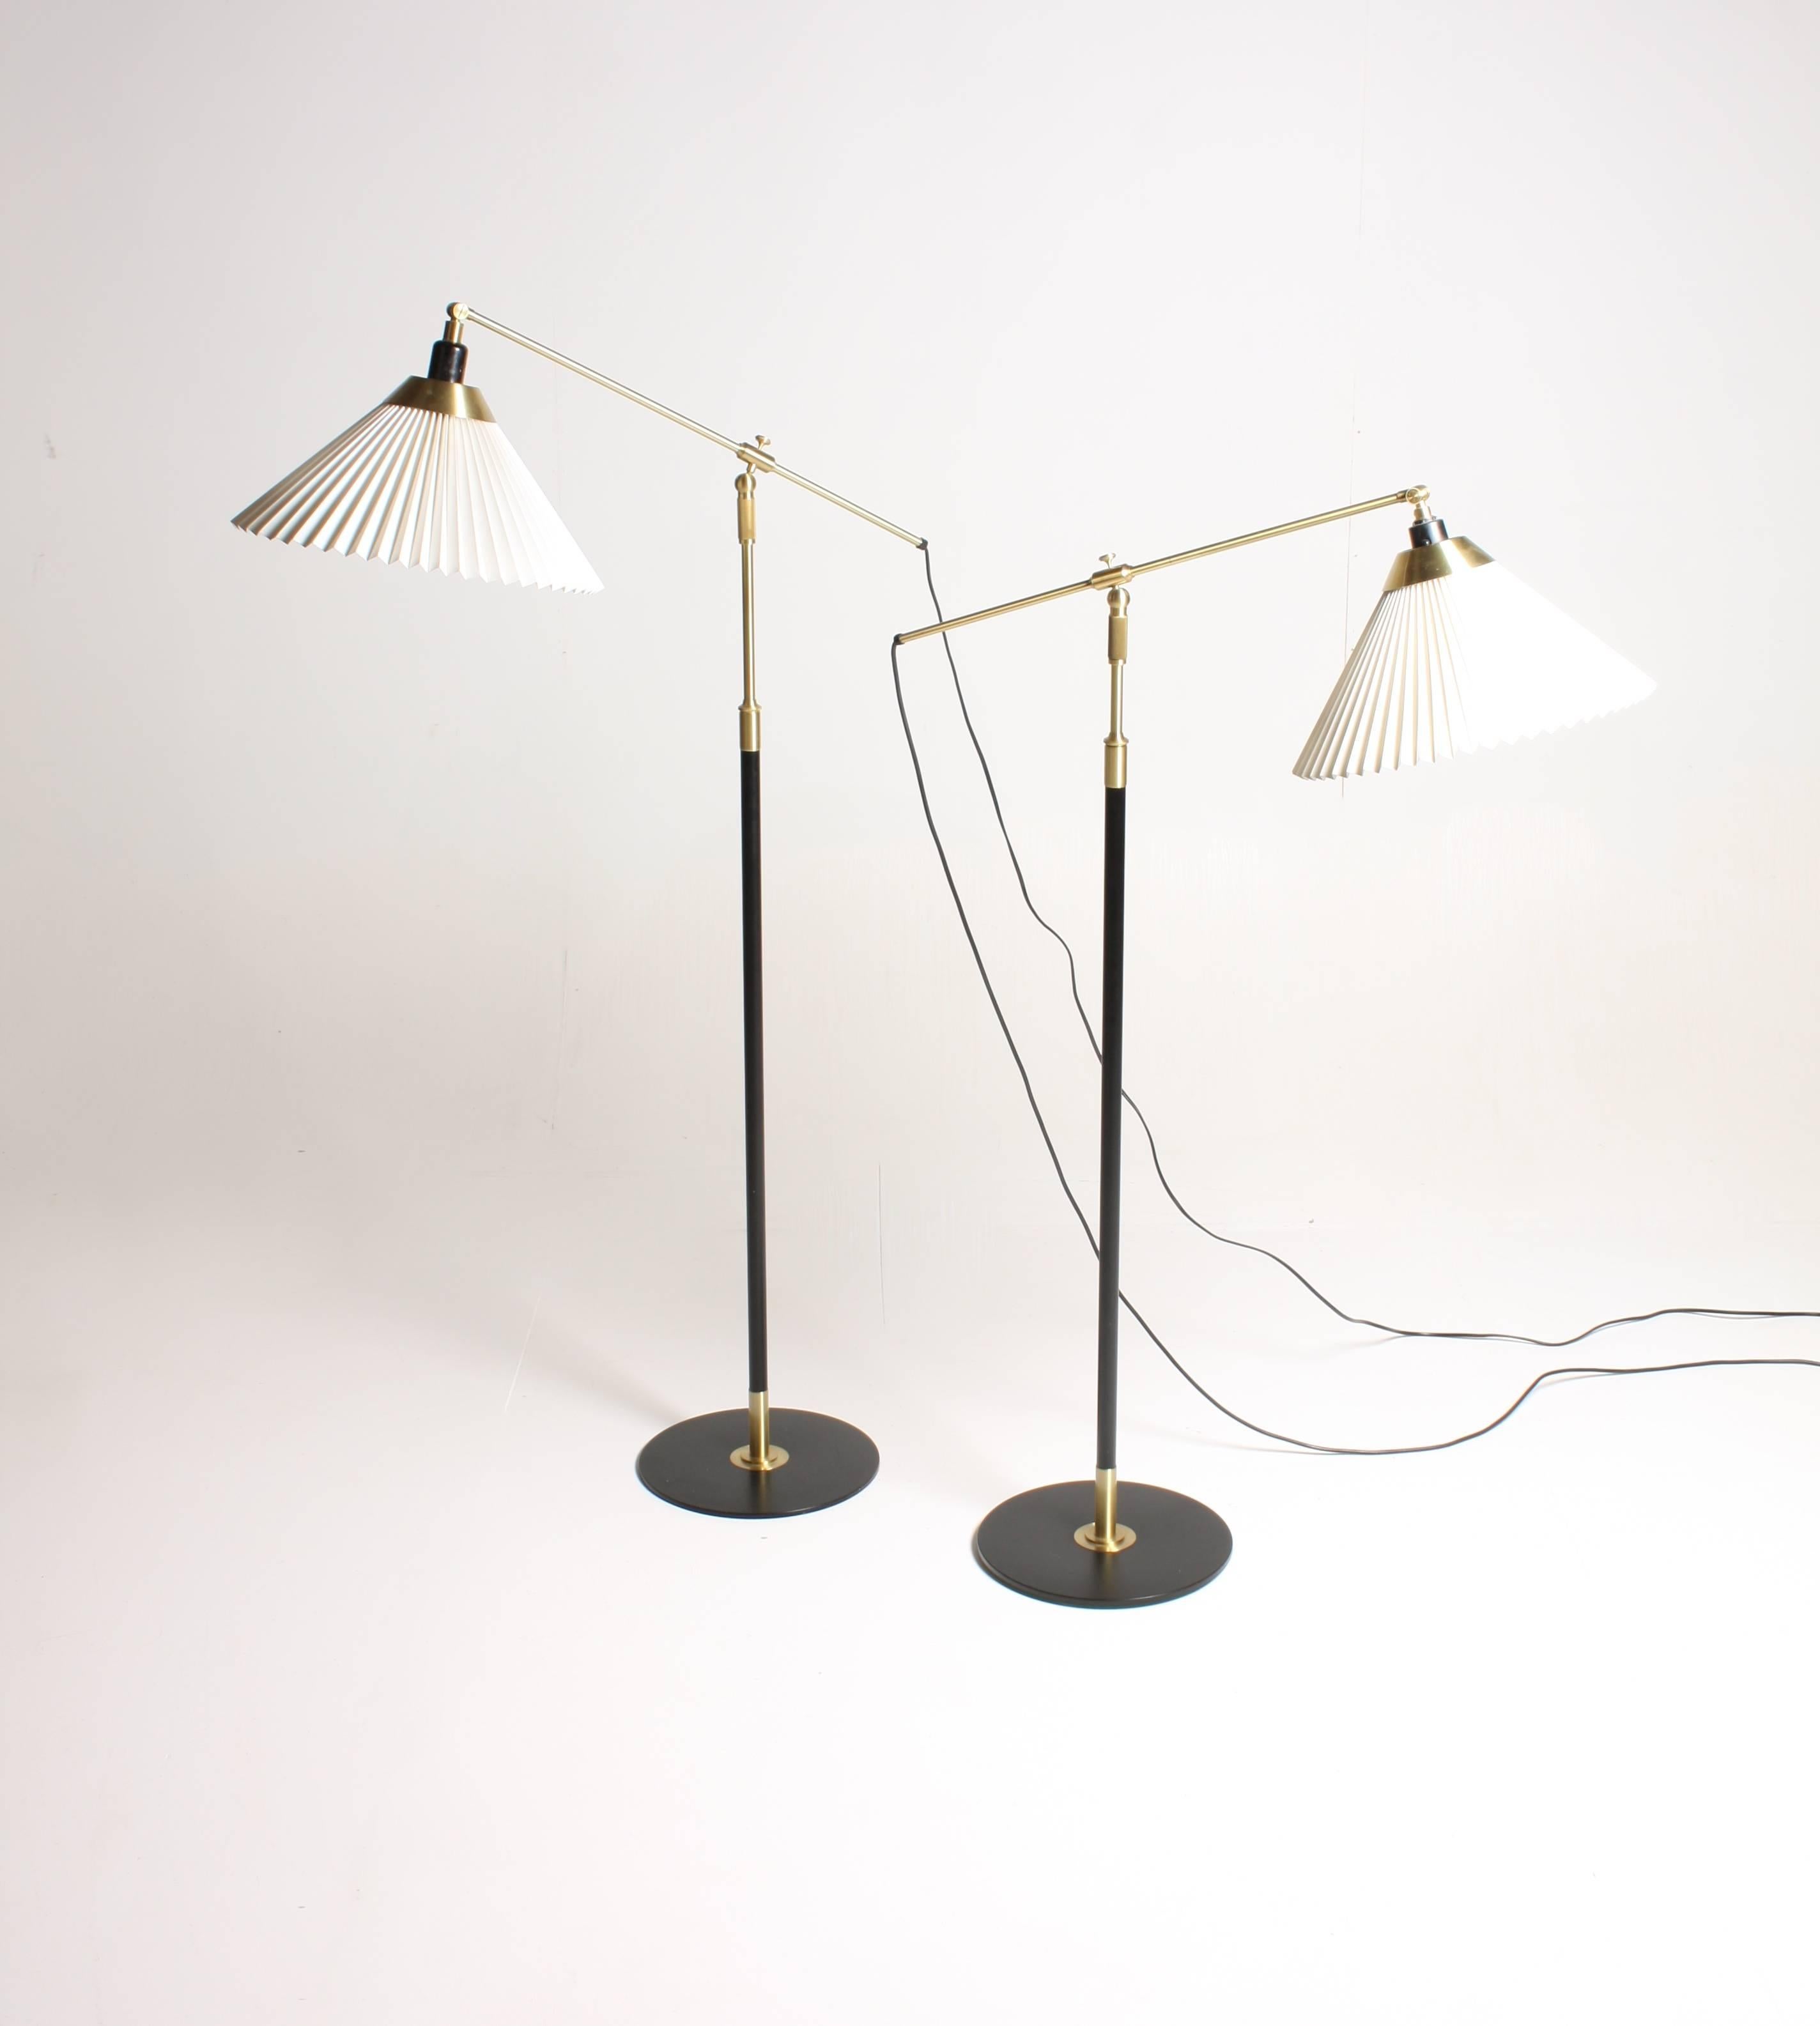 Pair of adjustable floor lamps in black painted metal and brass designed by Le Klint studio. Made in Denmark. Very nice original condition.